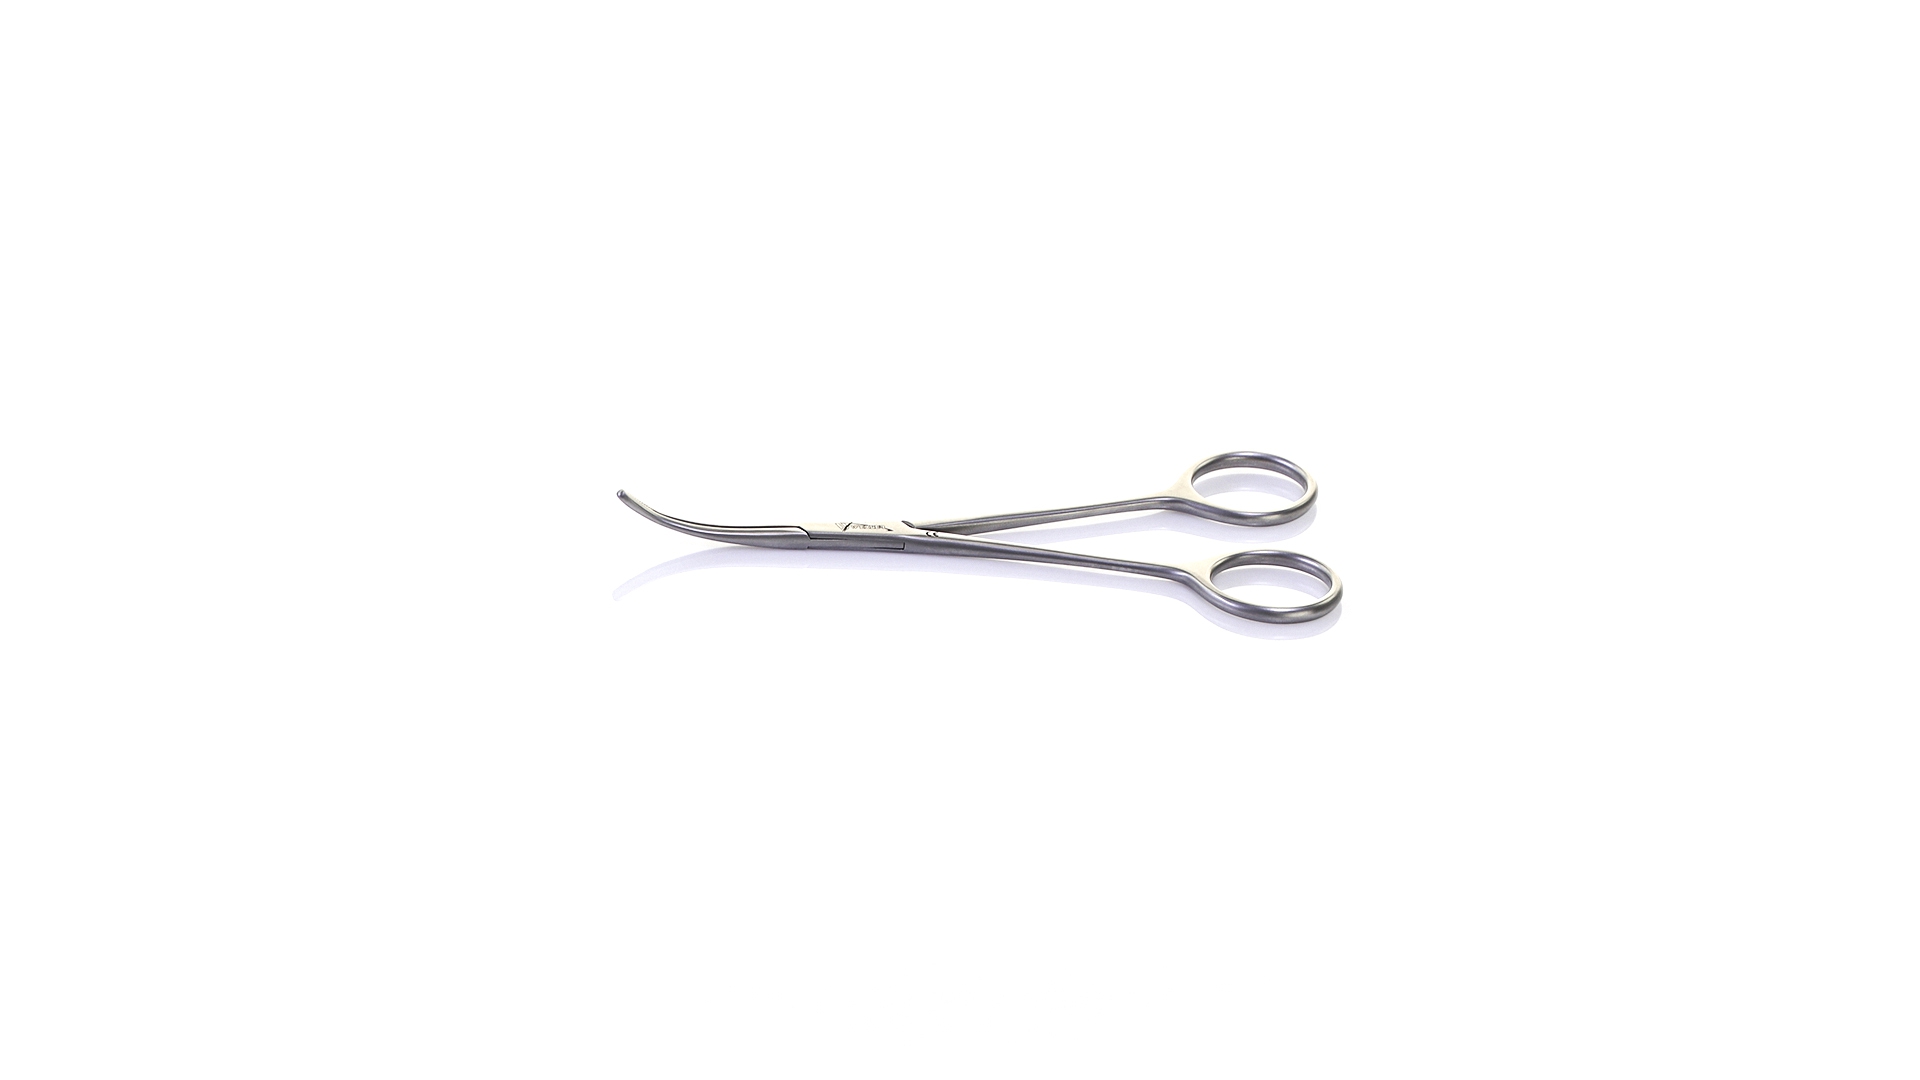 Waterson's Dissector - Curved Delicate serrated jaws